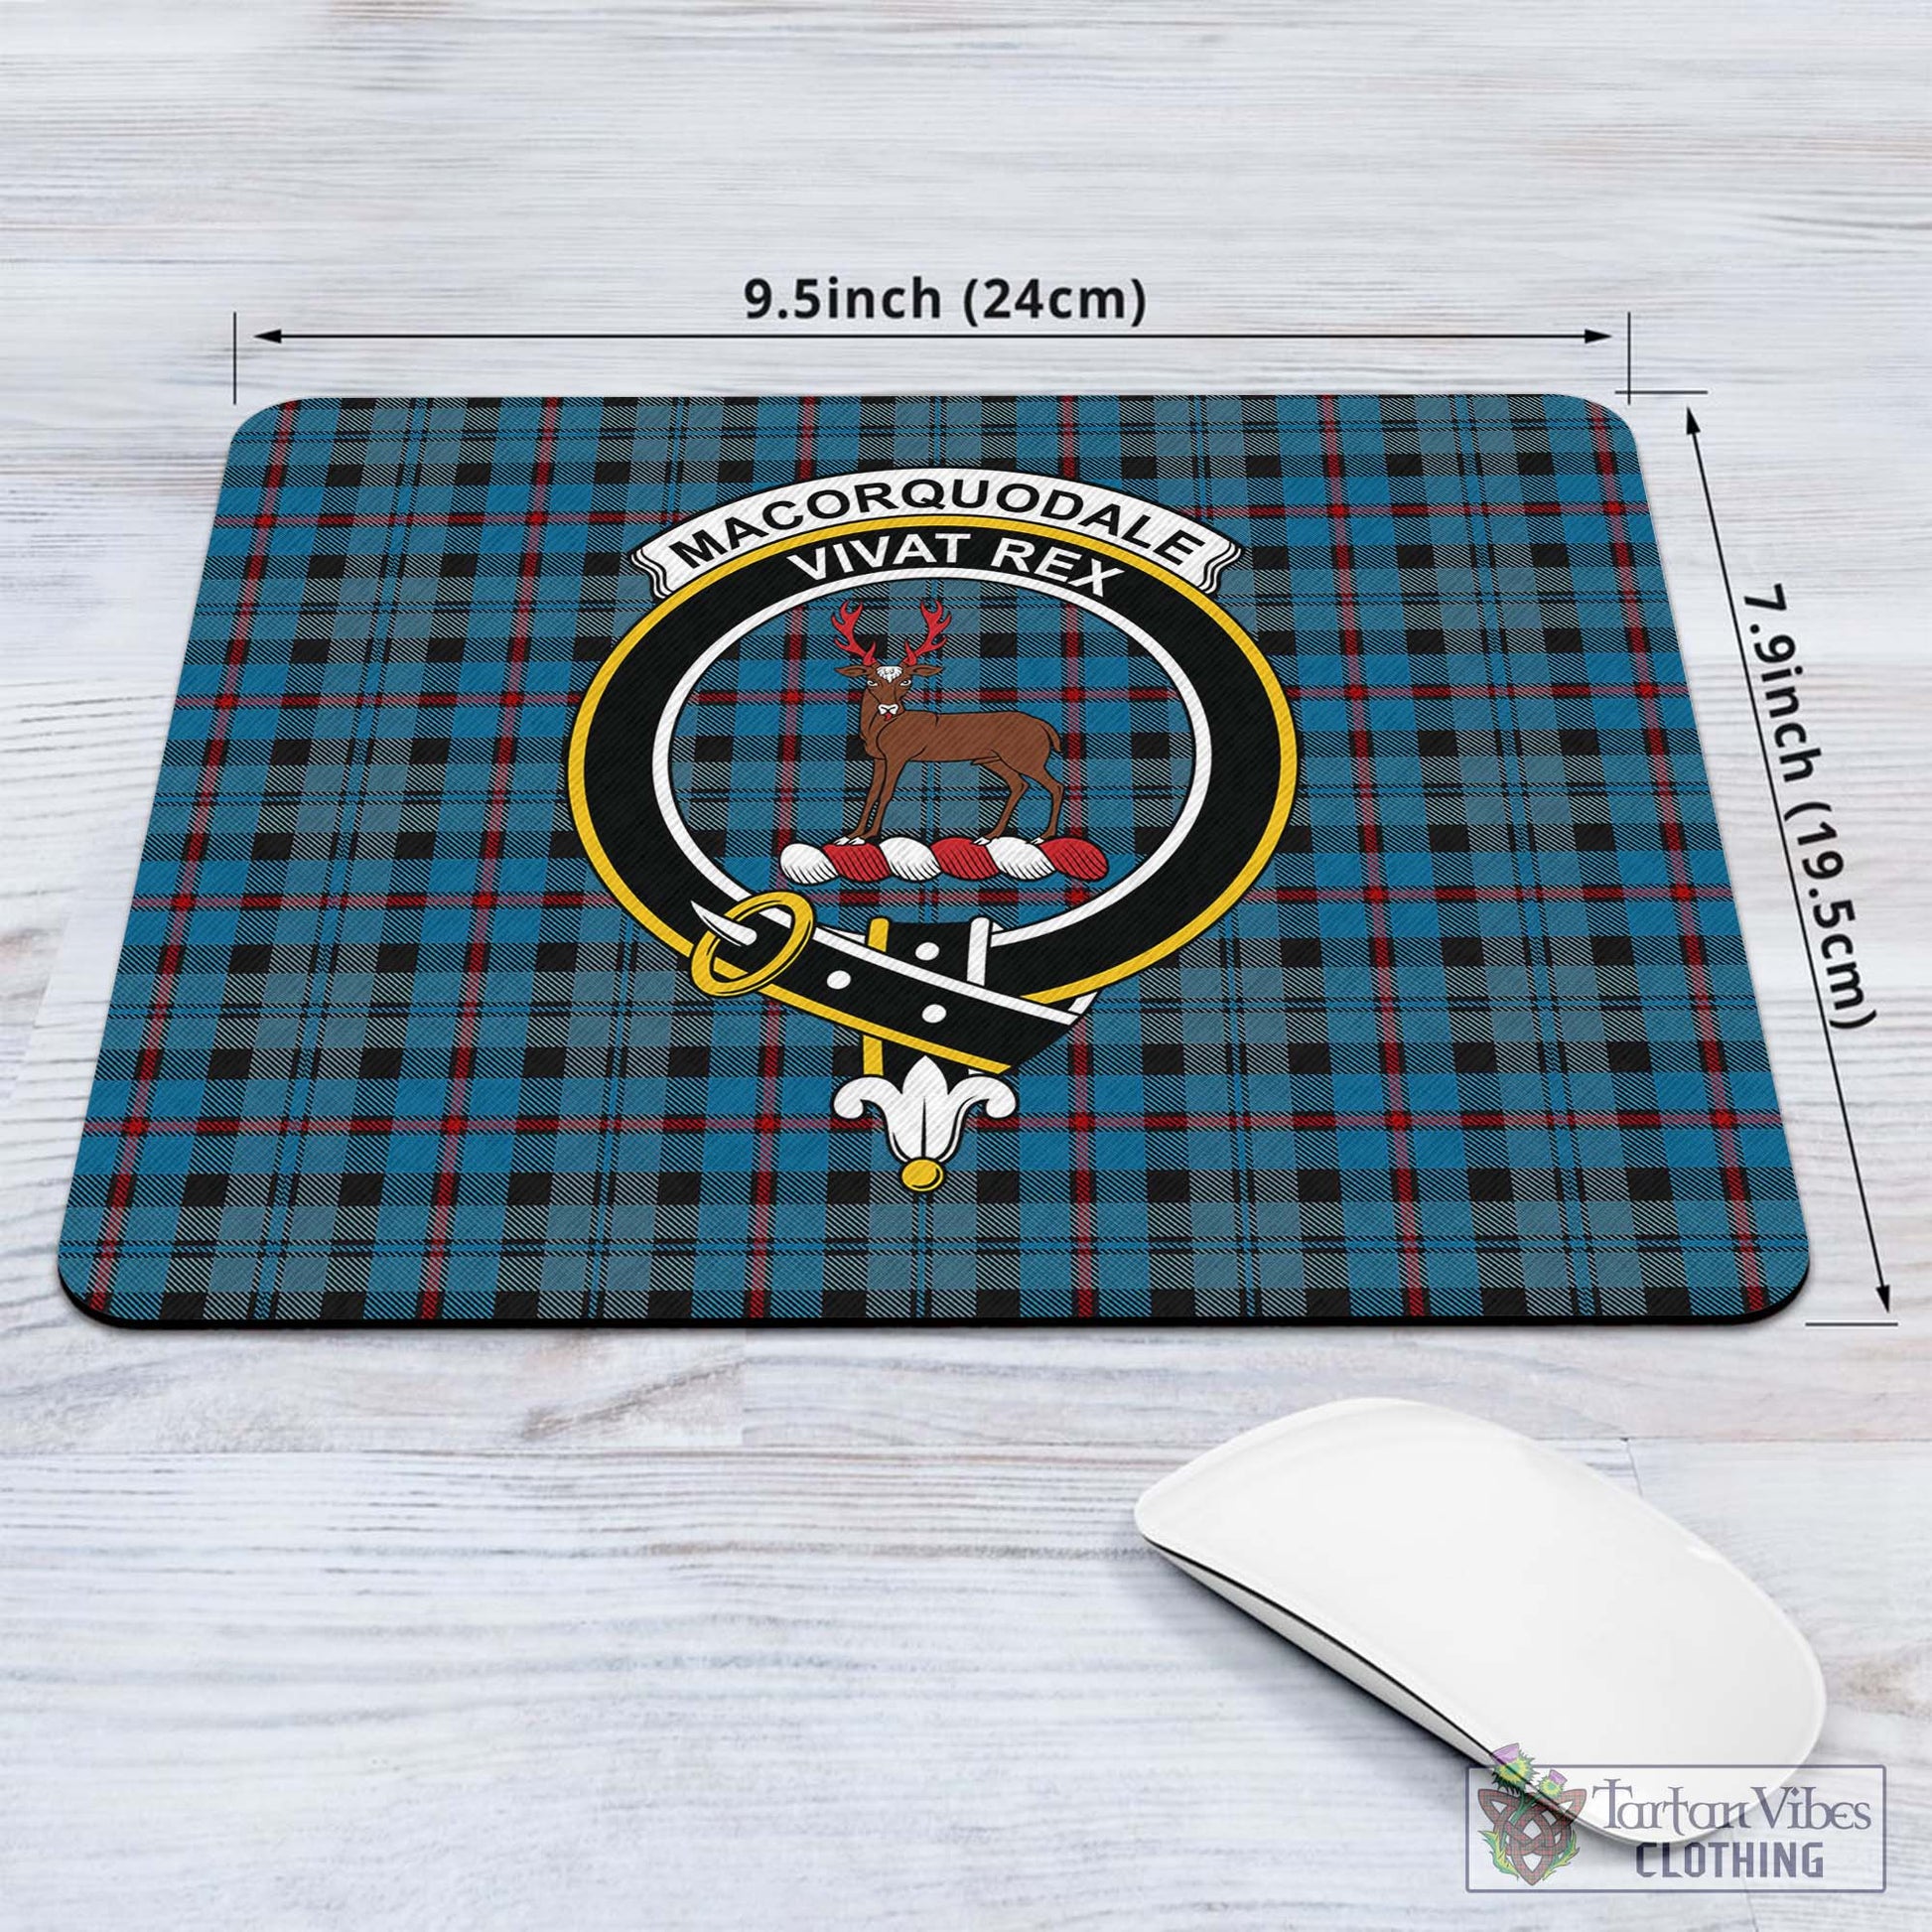 Tartan Vibes Clothing MacCorquodale Tartan Mouse Pad with Family Crest